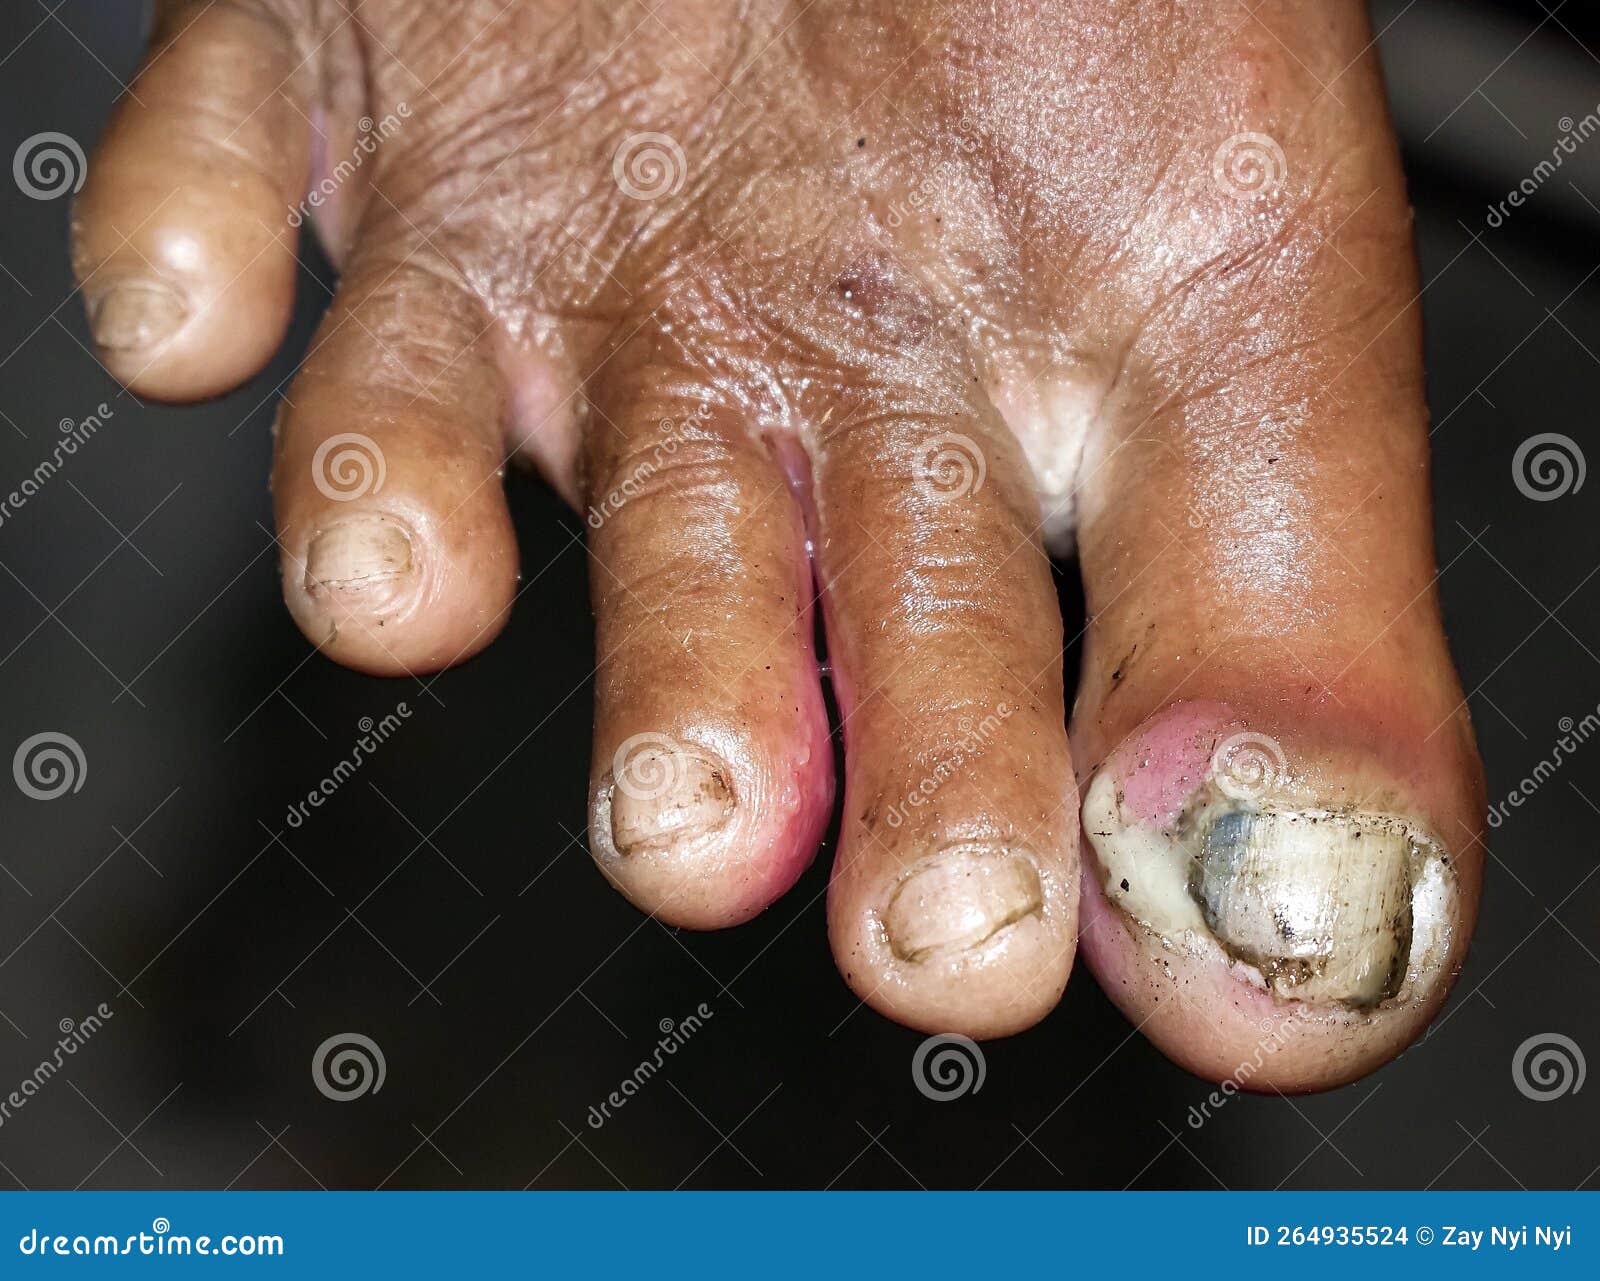 Fungal Infection Called Tinea Pedis and Paronychia at Toes Stock